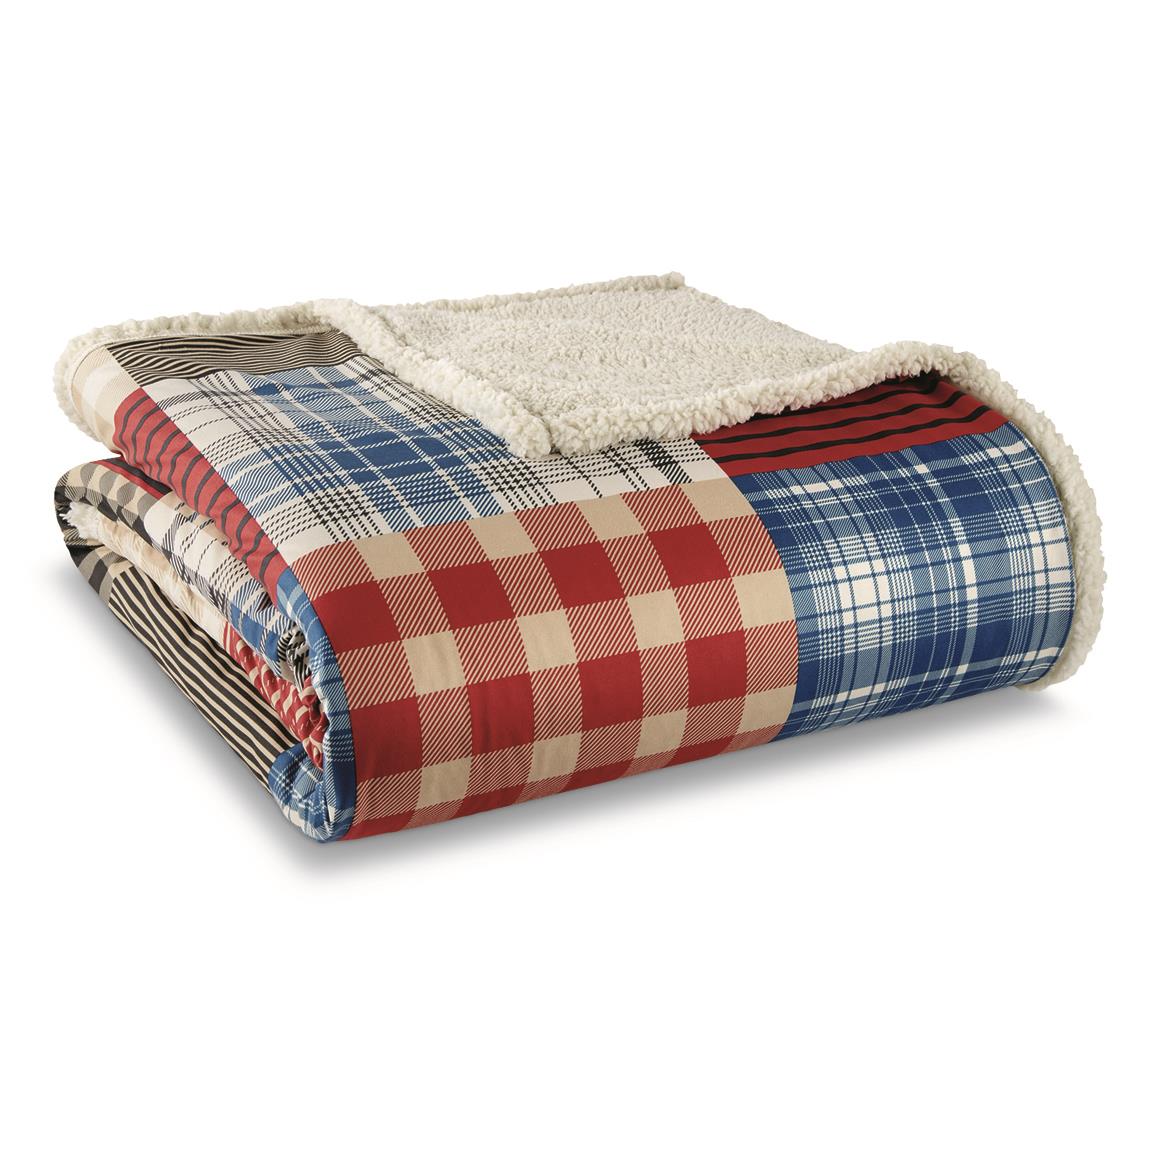 Shavel Home Products Micro Flannel Sherpa Blanket, Berry Patch Plaid